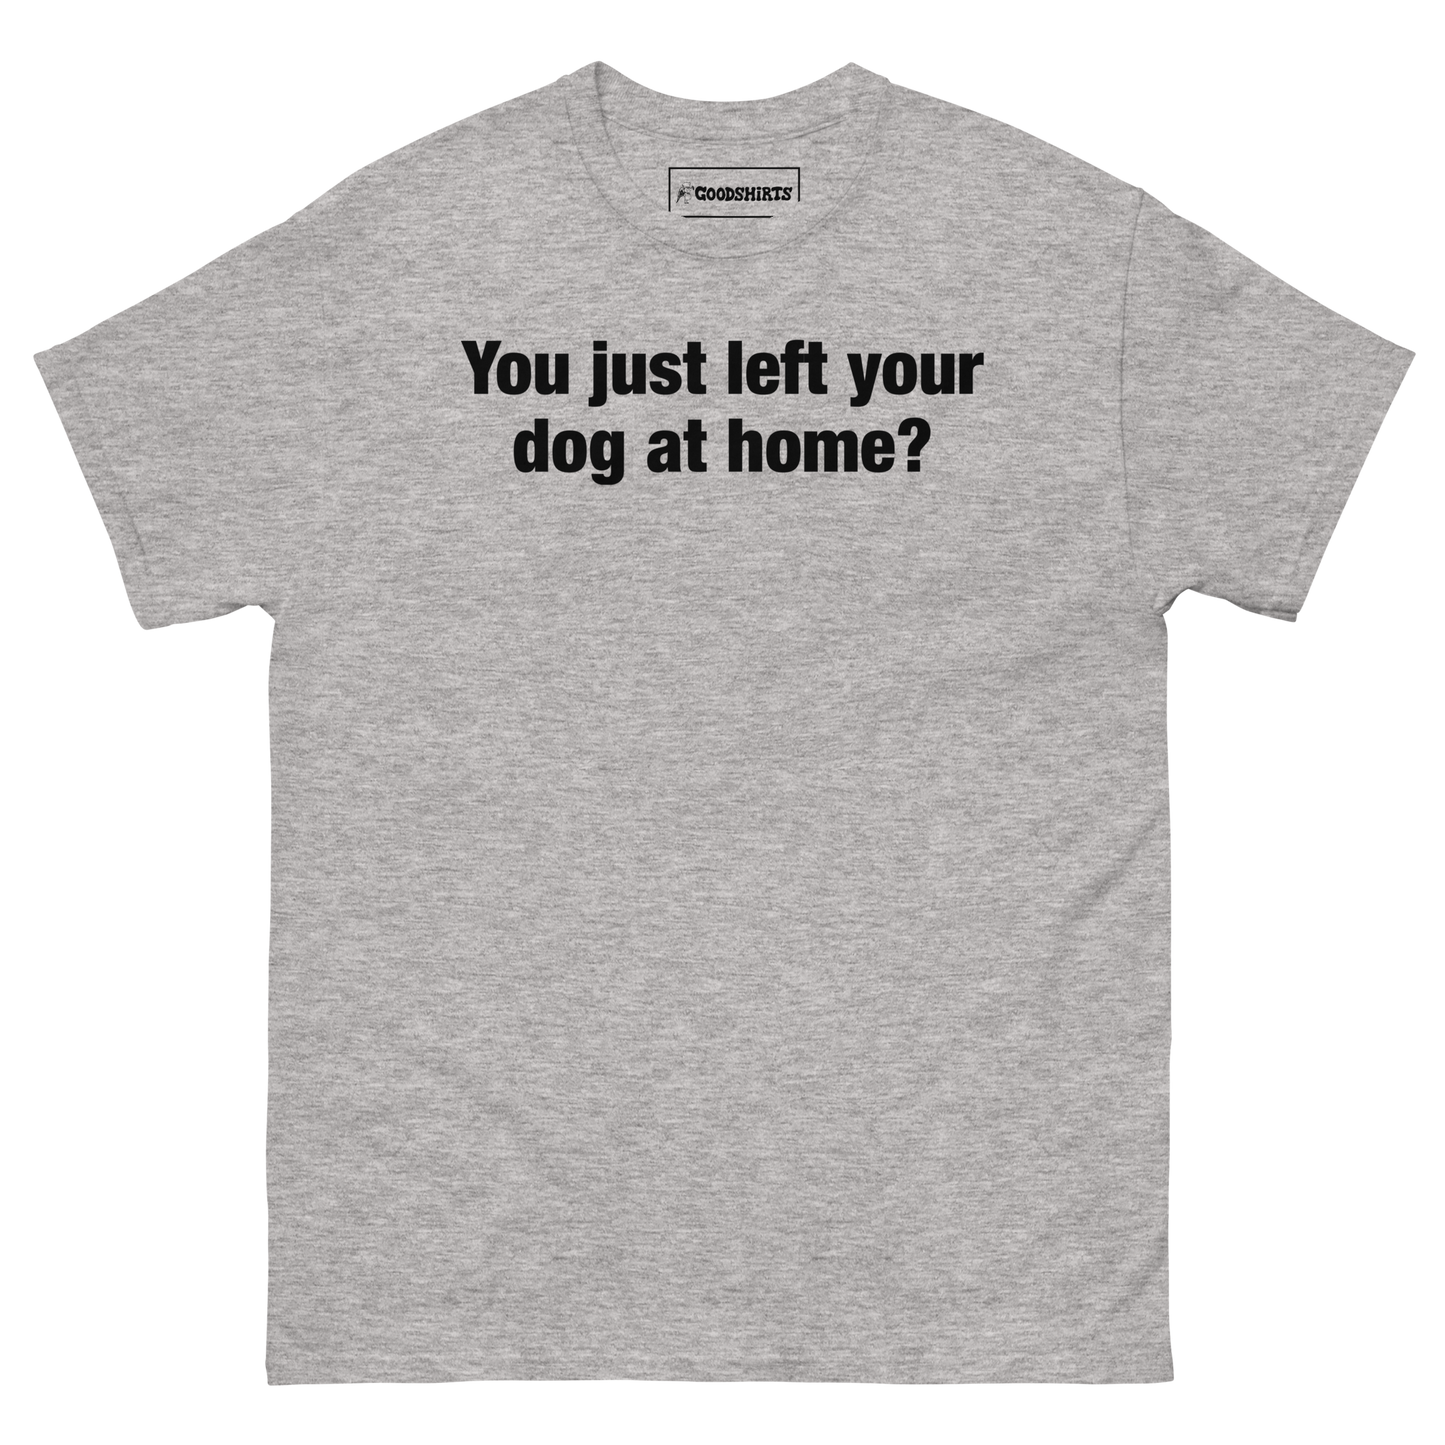 You Just Left Your Dog At Home?